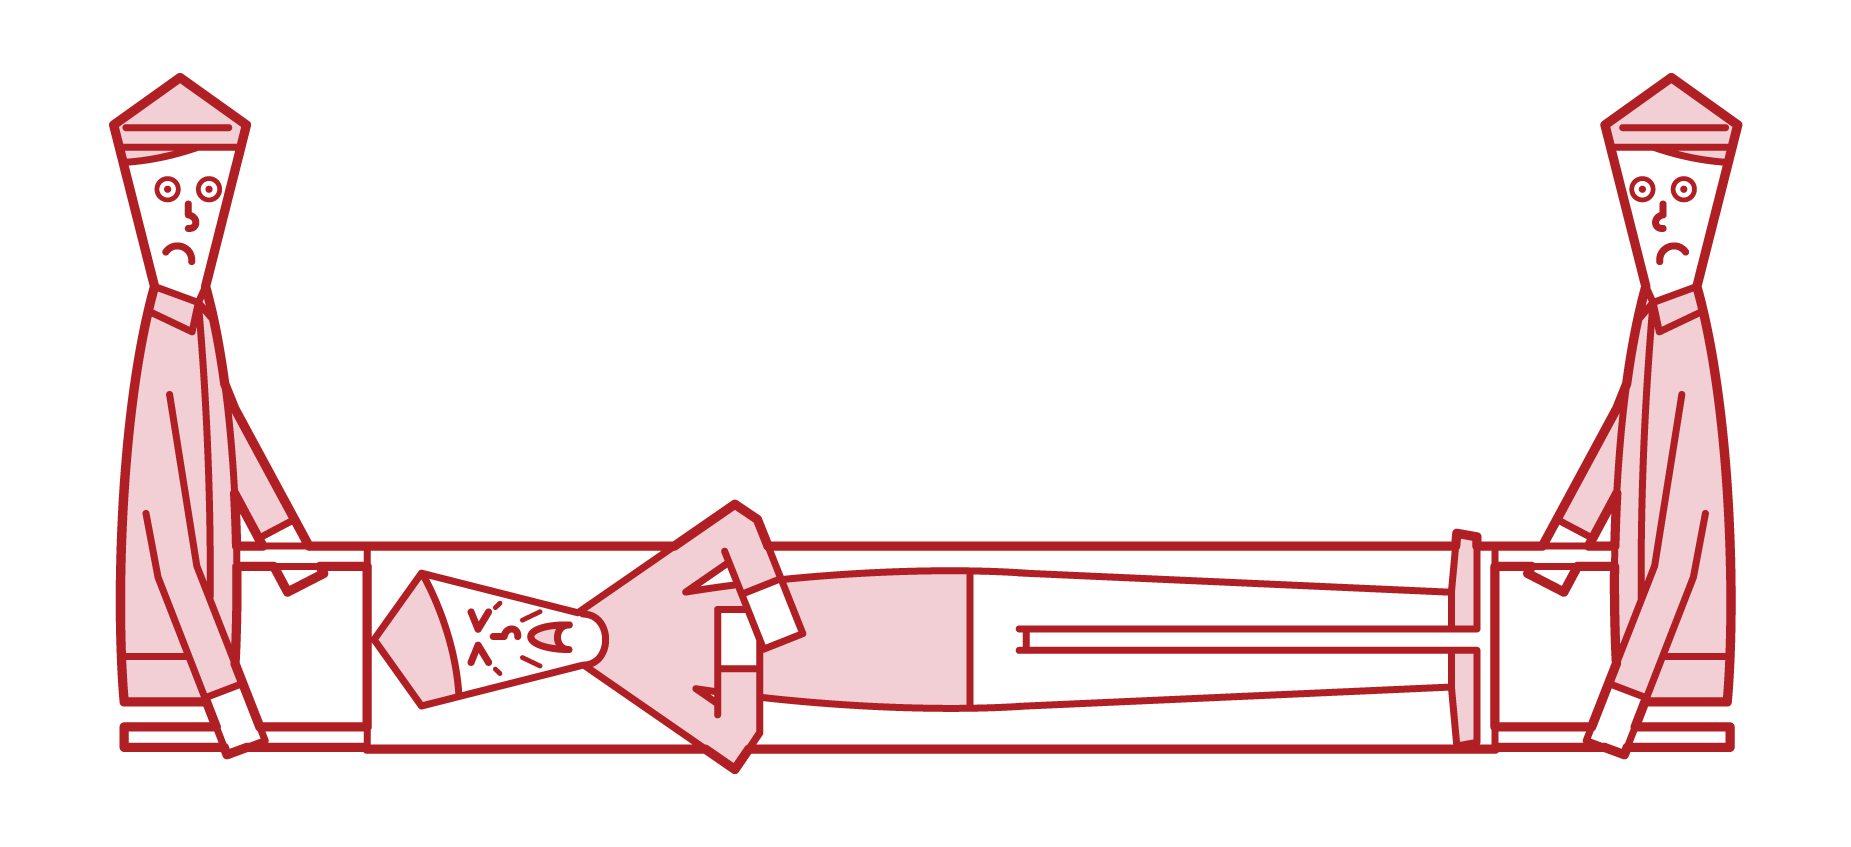 Illustration of a person (grandfather) carried on a stretcher